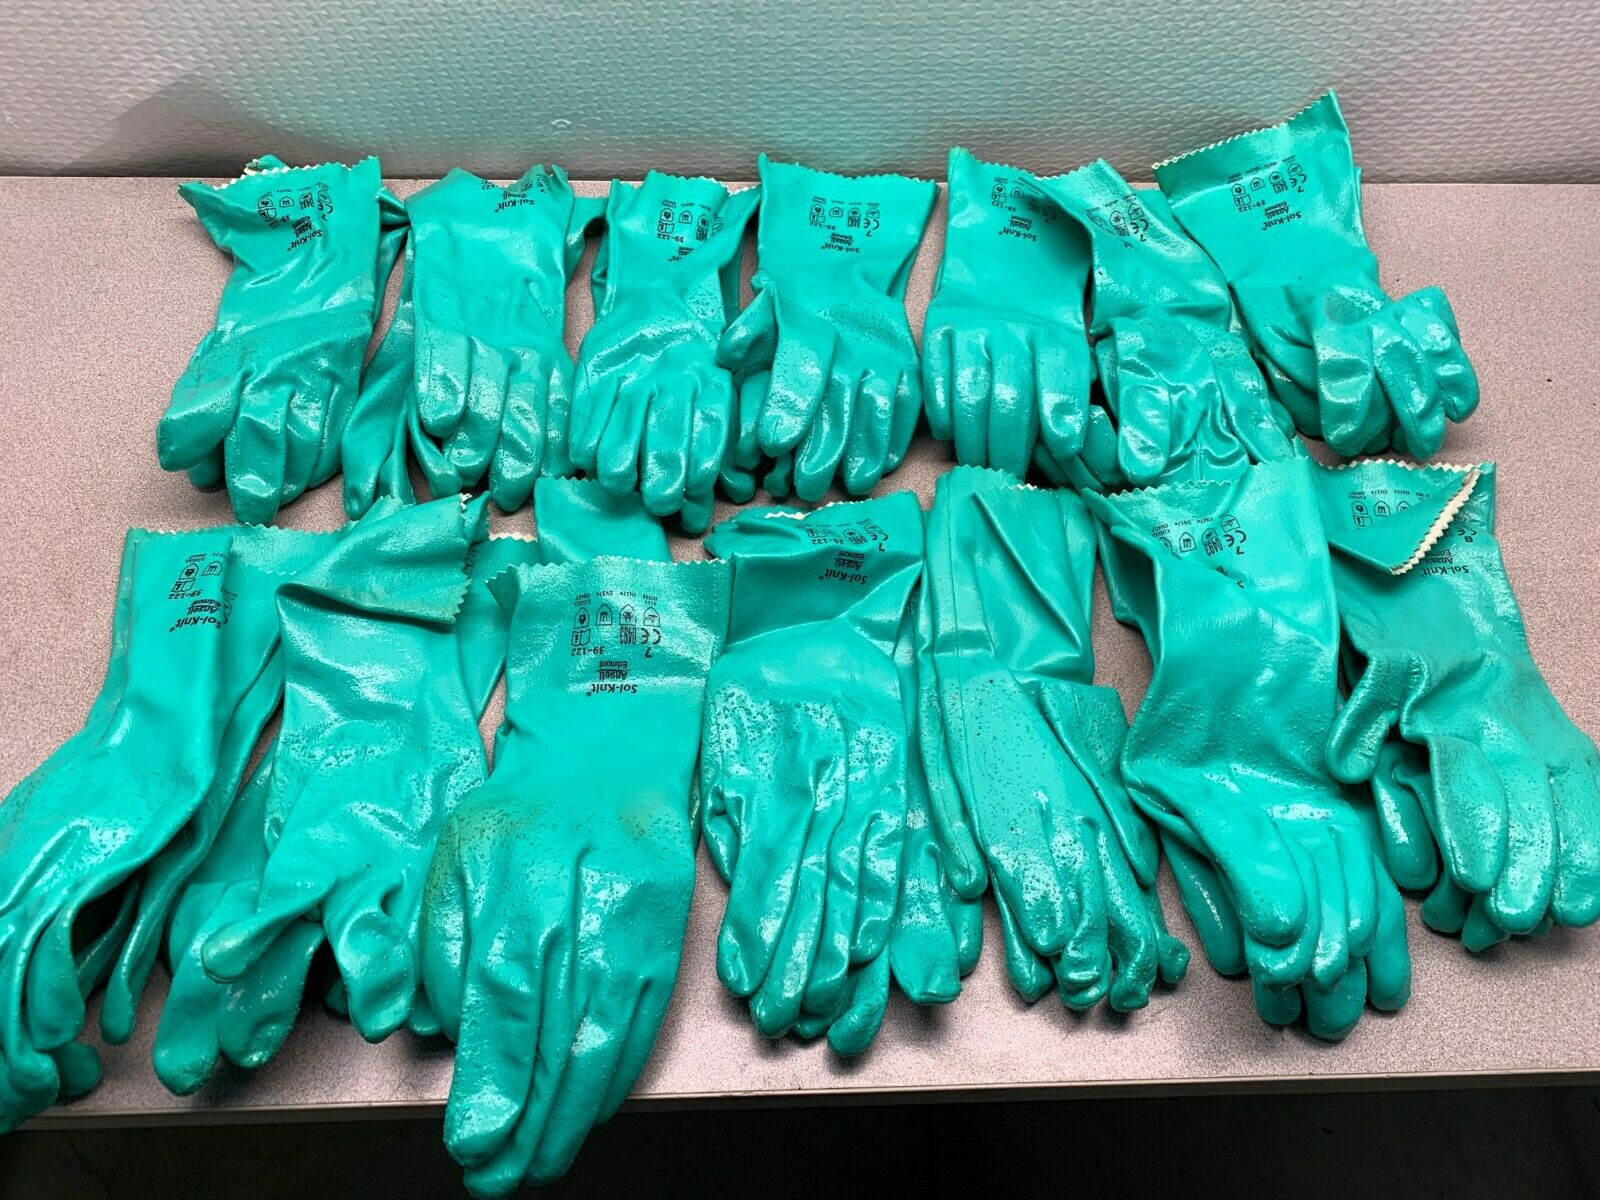 14 PAIR NEW ANSELL EDMONT SOL-KNIT SIZE 7 Green Nitrile Coated Gloves 39-122